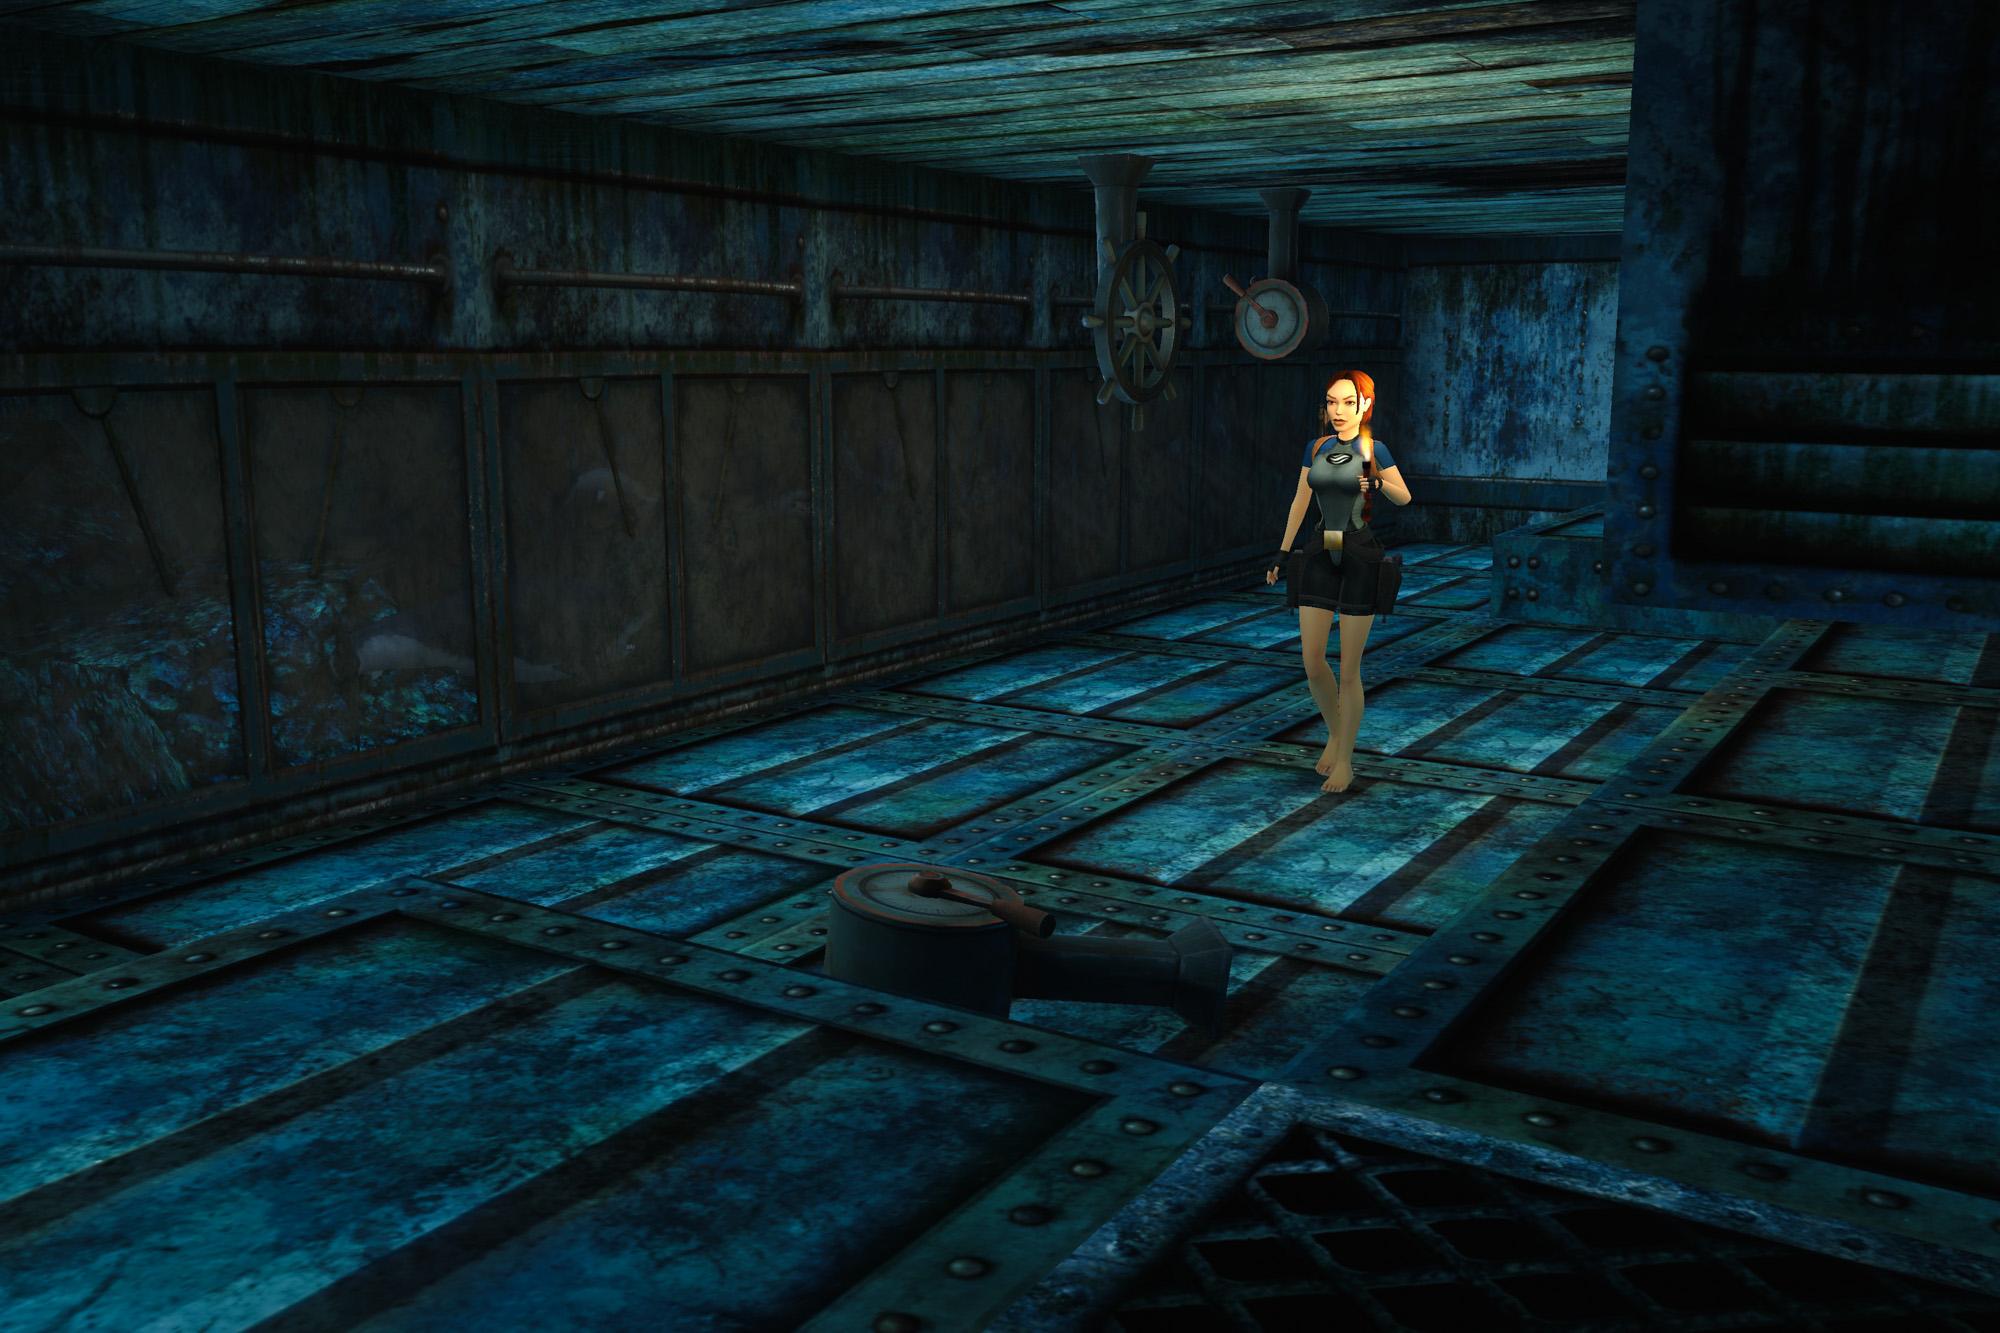 Lara Croft holding a flare and walking on the upside-down bridge in the Wreck of Maria Doria